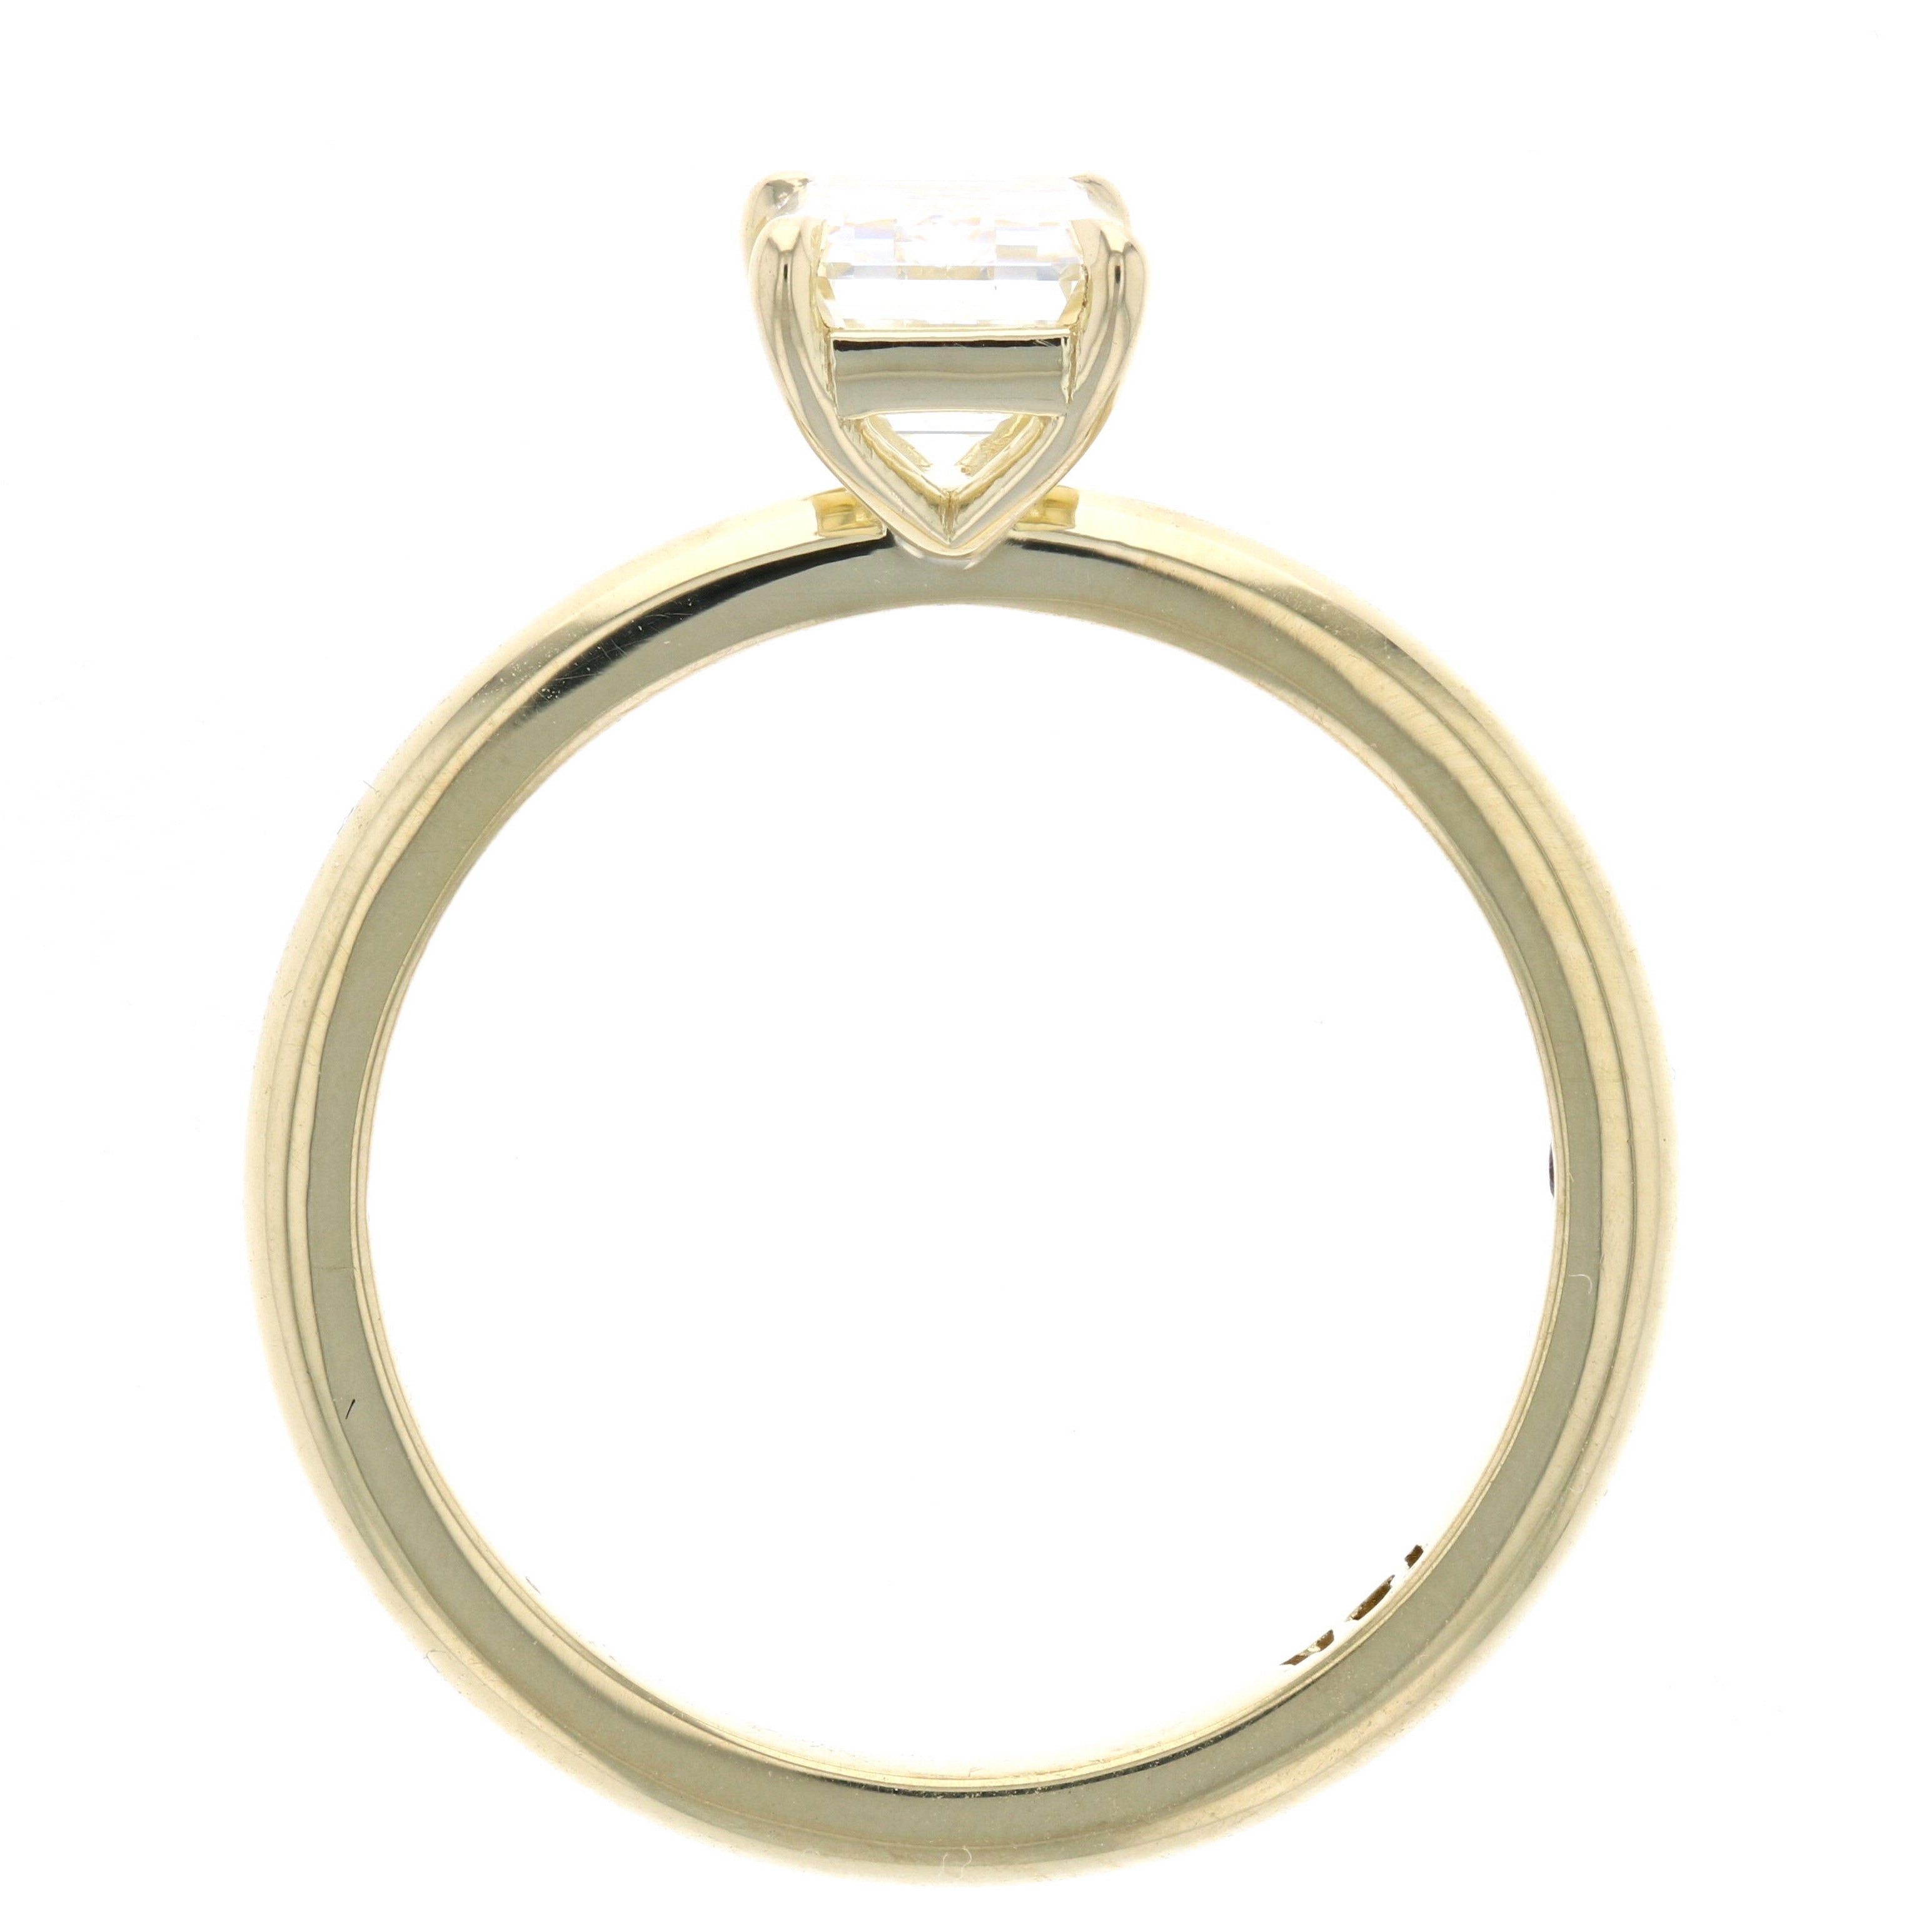 Emerald Cut Diamond Engagement Ring Solitaire In Yellow Gold with Wire Around the Basket